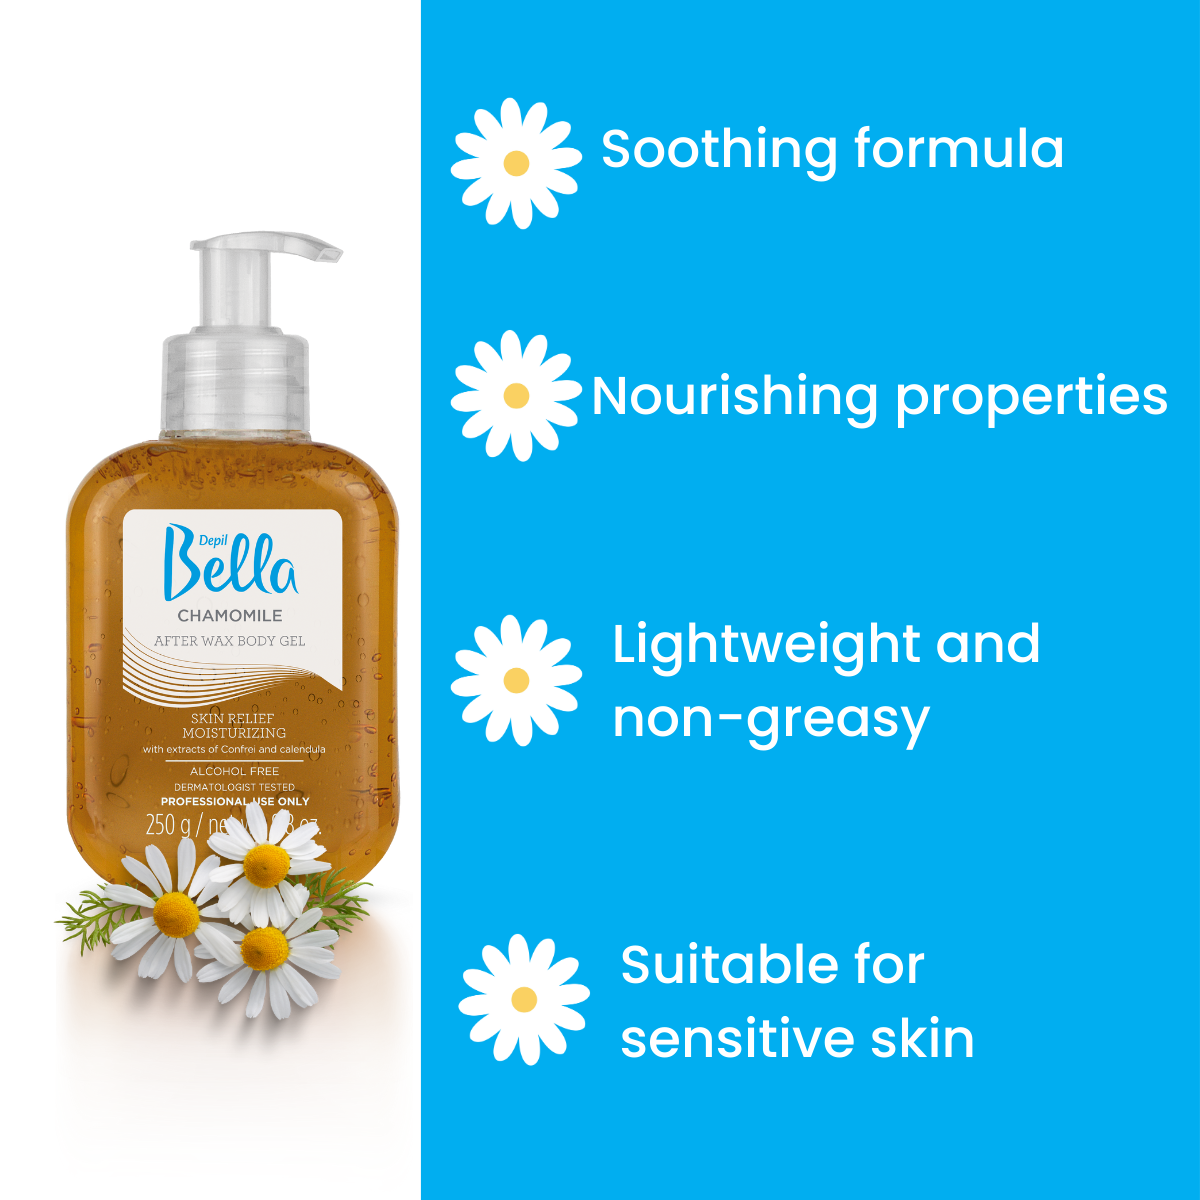 Kit Depil Bella, Yellow - Dolomita, Pre Waxing Astringent Lotion, Post Waxing - Oil Moisturizing Remover, Chamomile Body Gel - Dolomita Powder - Buy professional cosmetics dedicated to hair removal